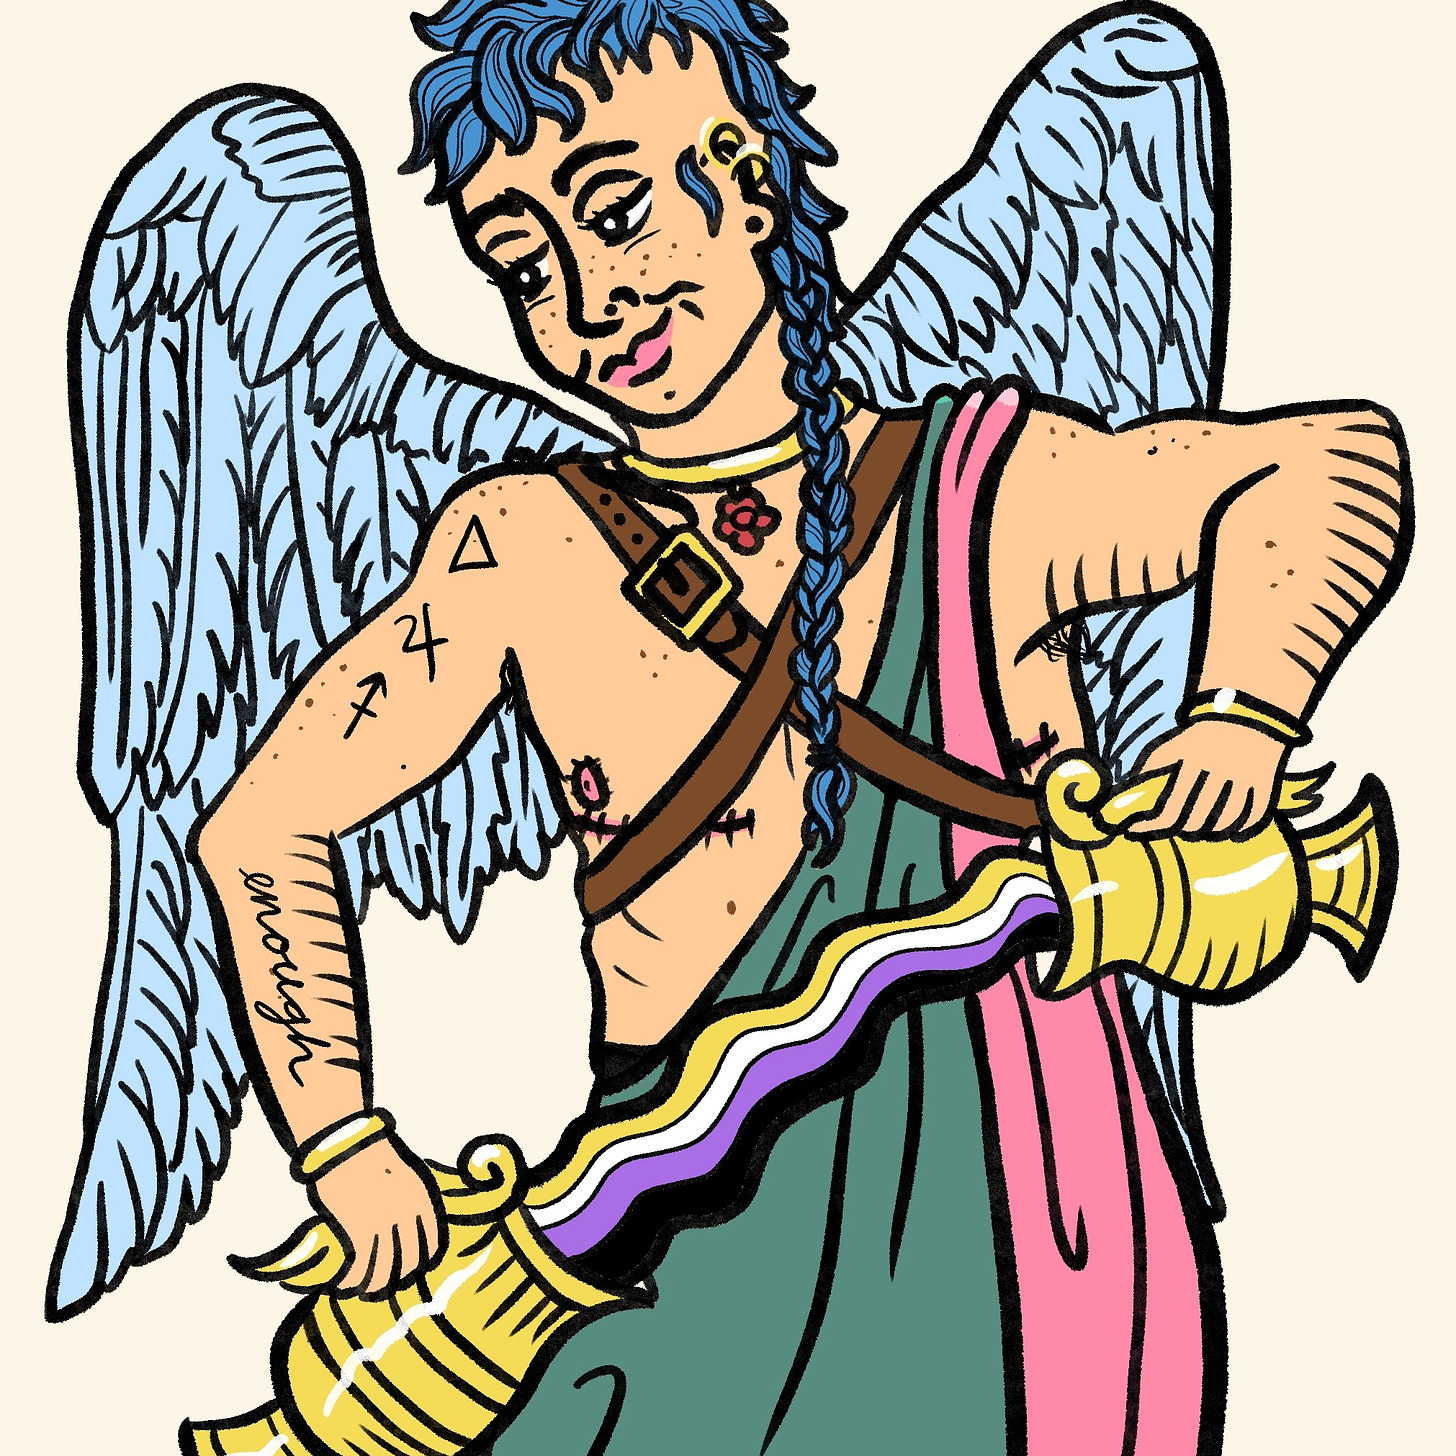 A smiling angel with a long blue mullet and top surgery scars mixes water in the color of the non-binary flag between two pitchers. The angel wears a green and blue toga and has tattoos of the glyphs for Sagittarius, Jupiter, and Fire, along with the word "enough."